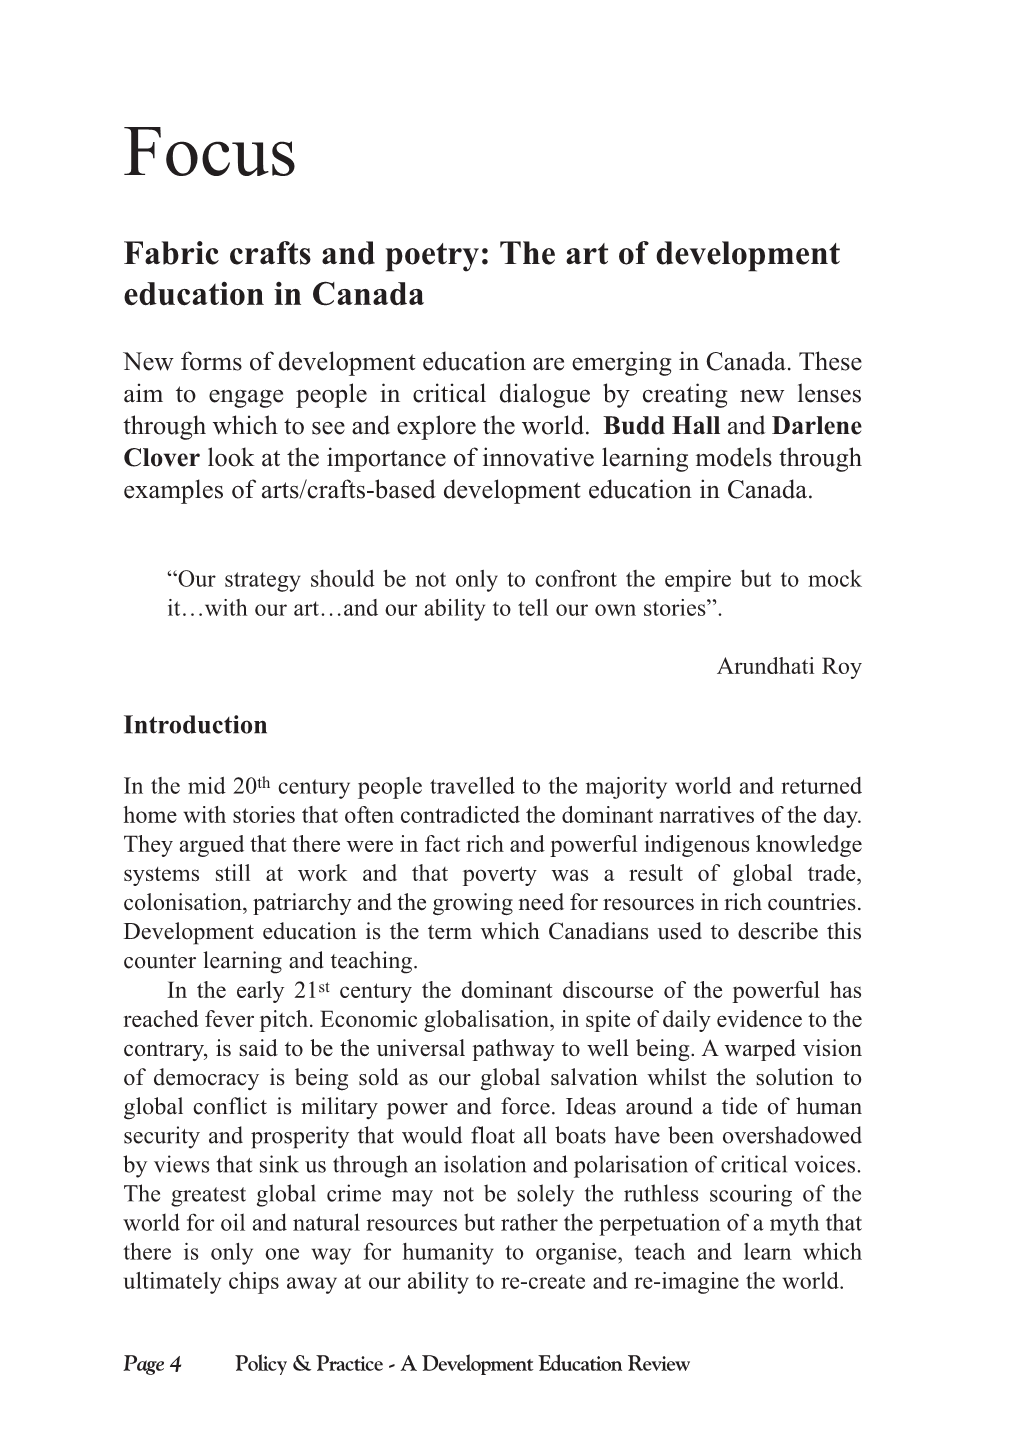 Fabric Crafts and Poetry: the Art of Development Education in Canada